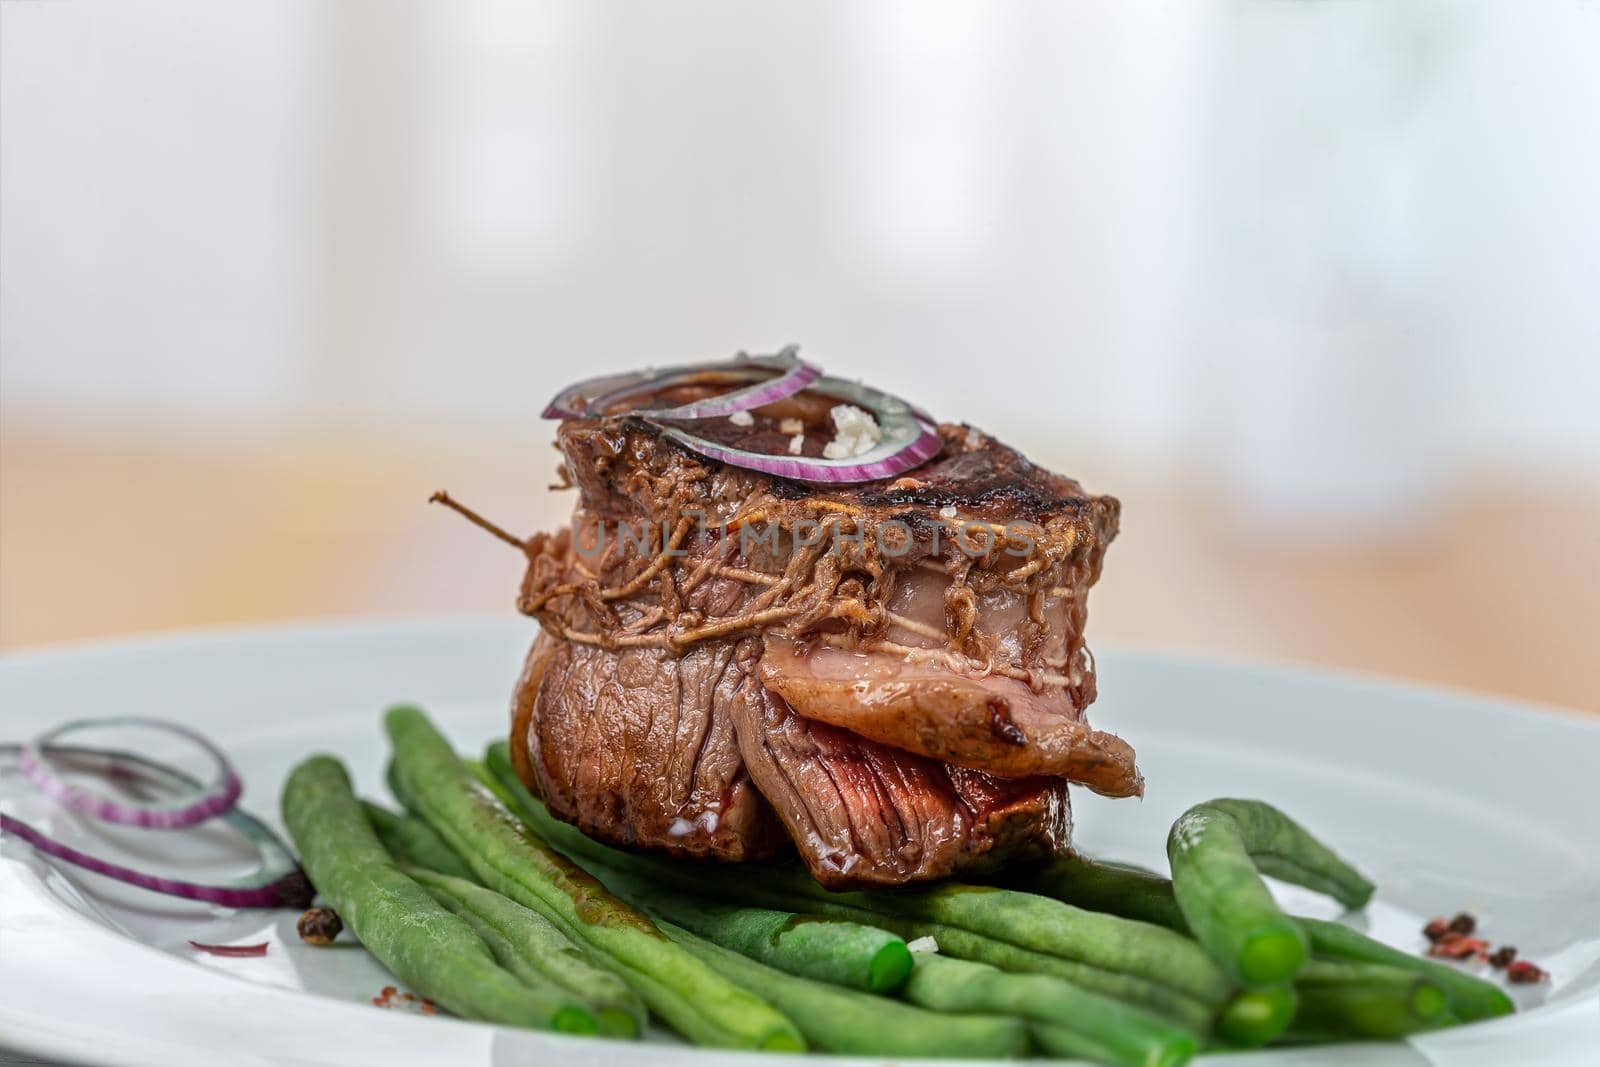 Top view of a grilled tournedos accompanied by green beans.